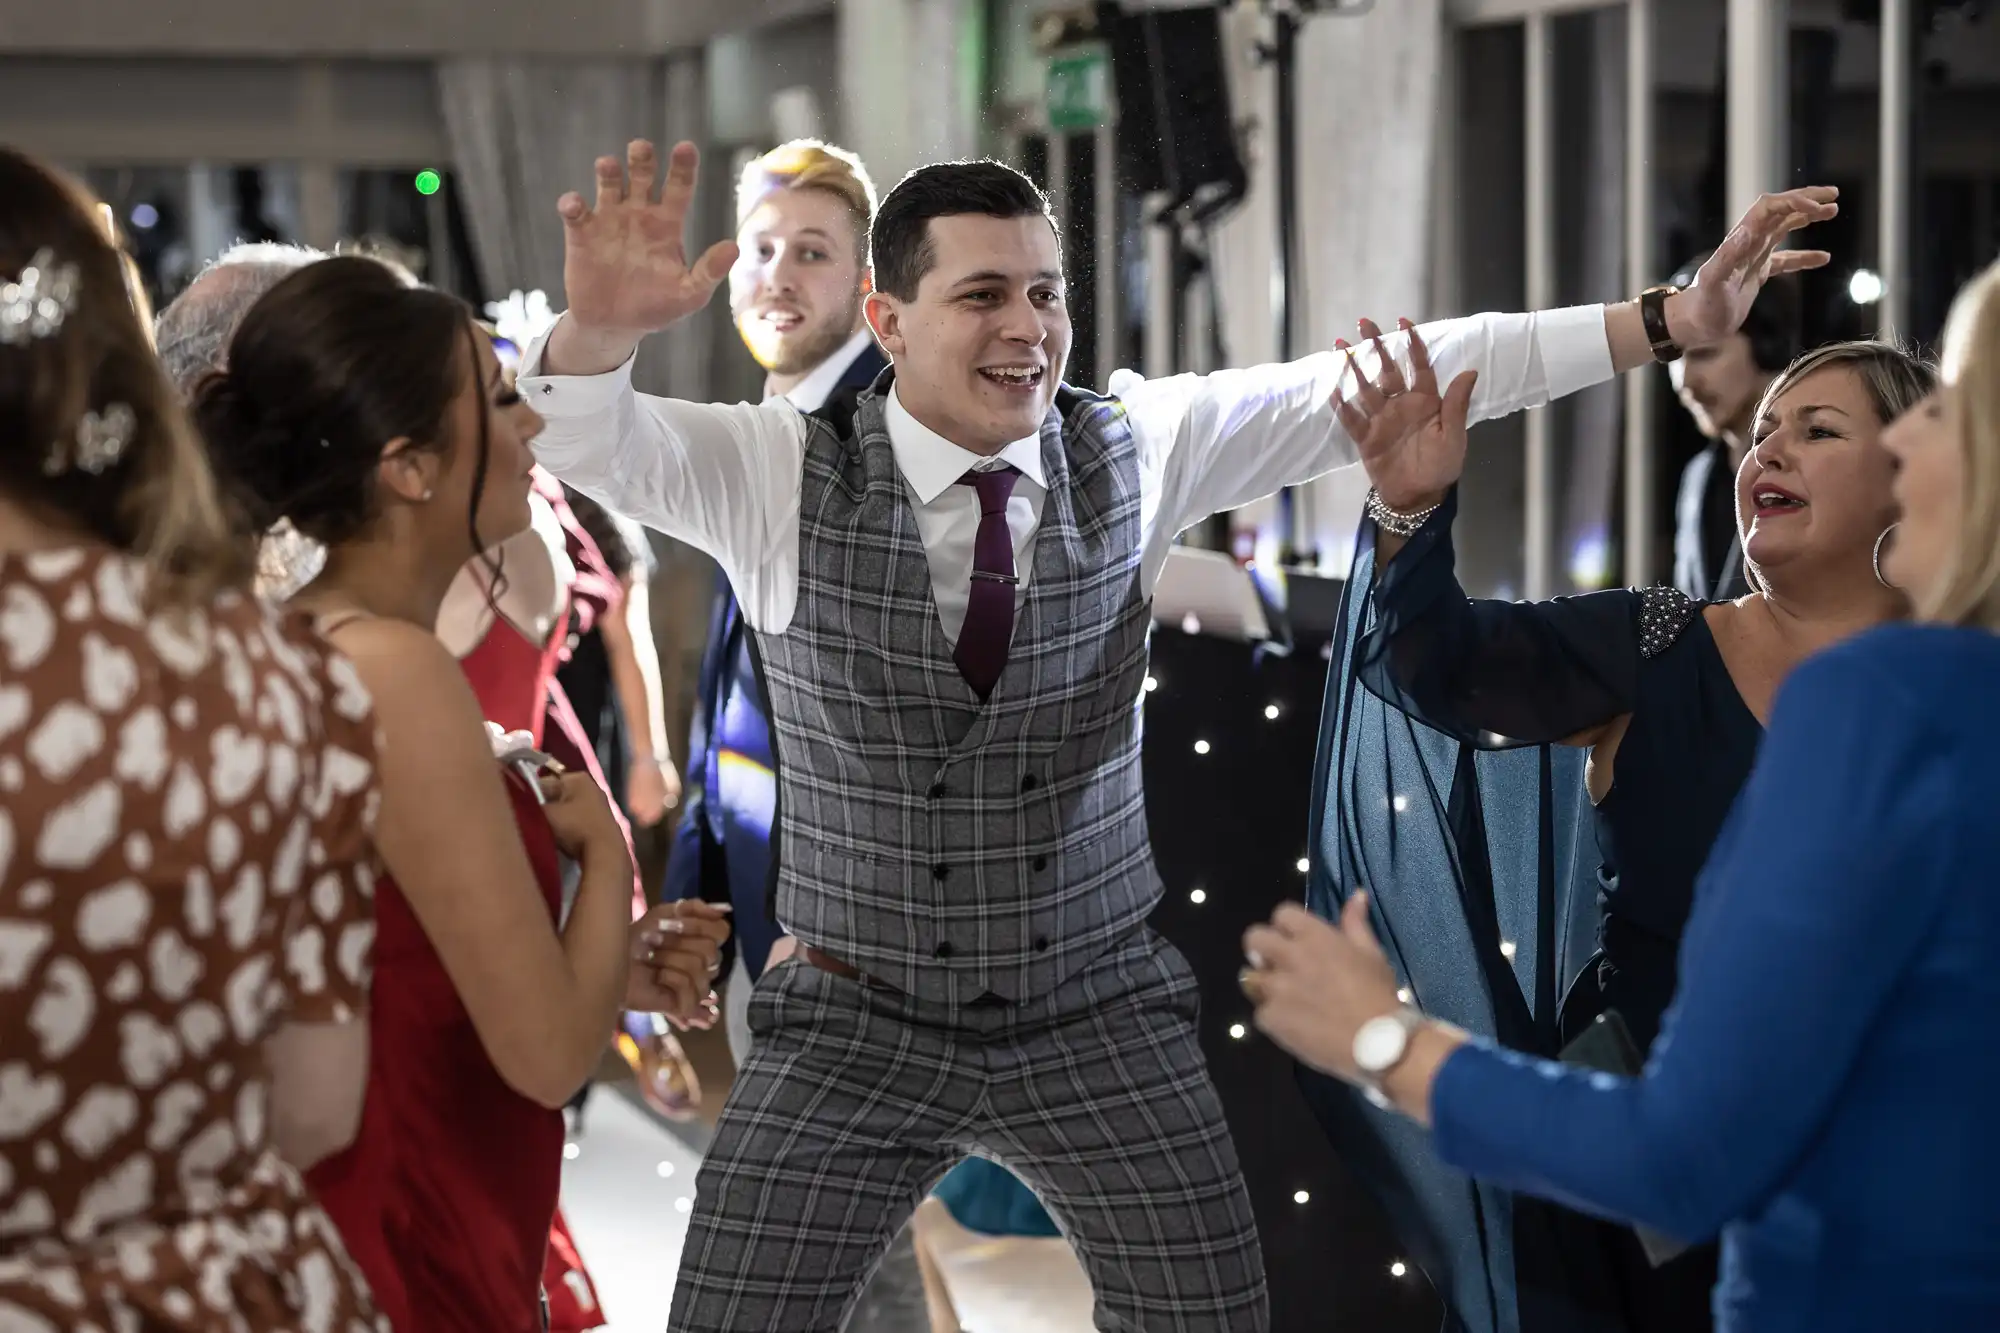 A man in a gray checkered suit dances enthusiastically with a group of people at a party.